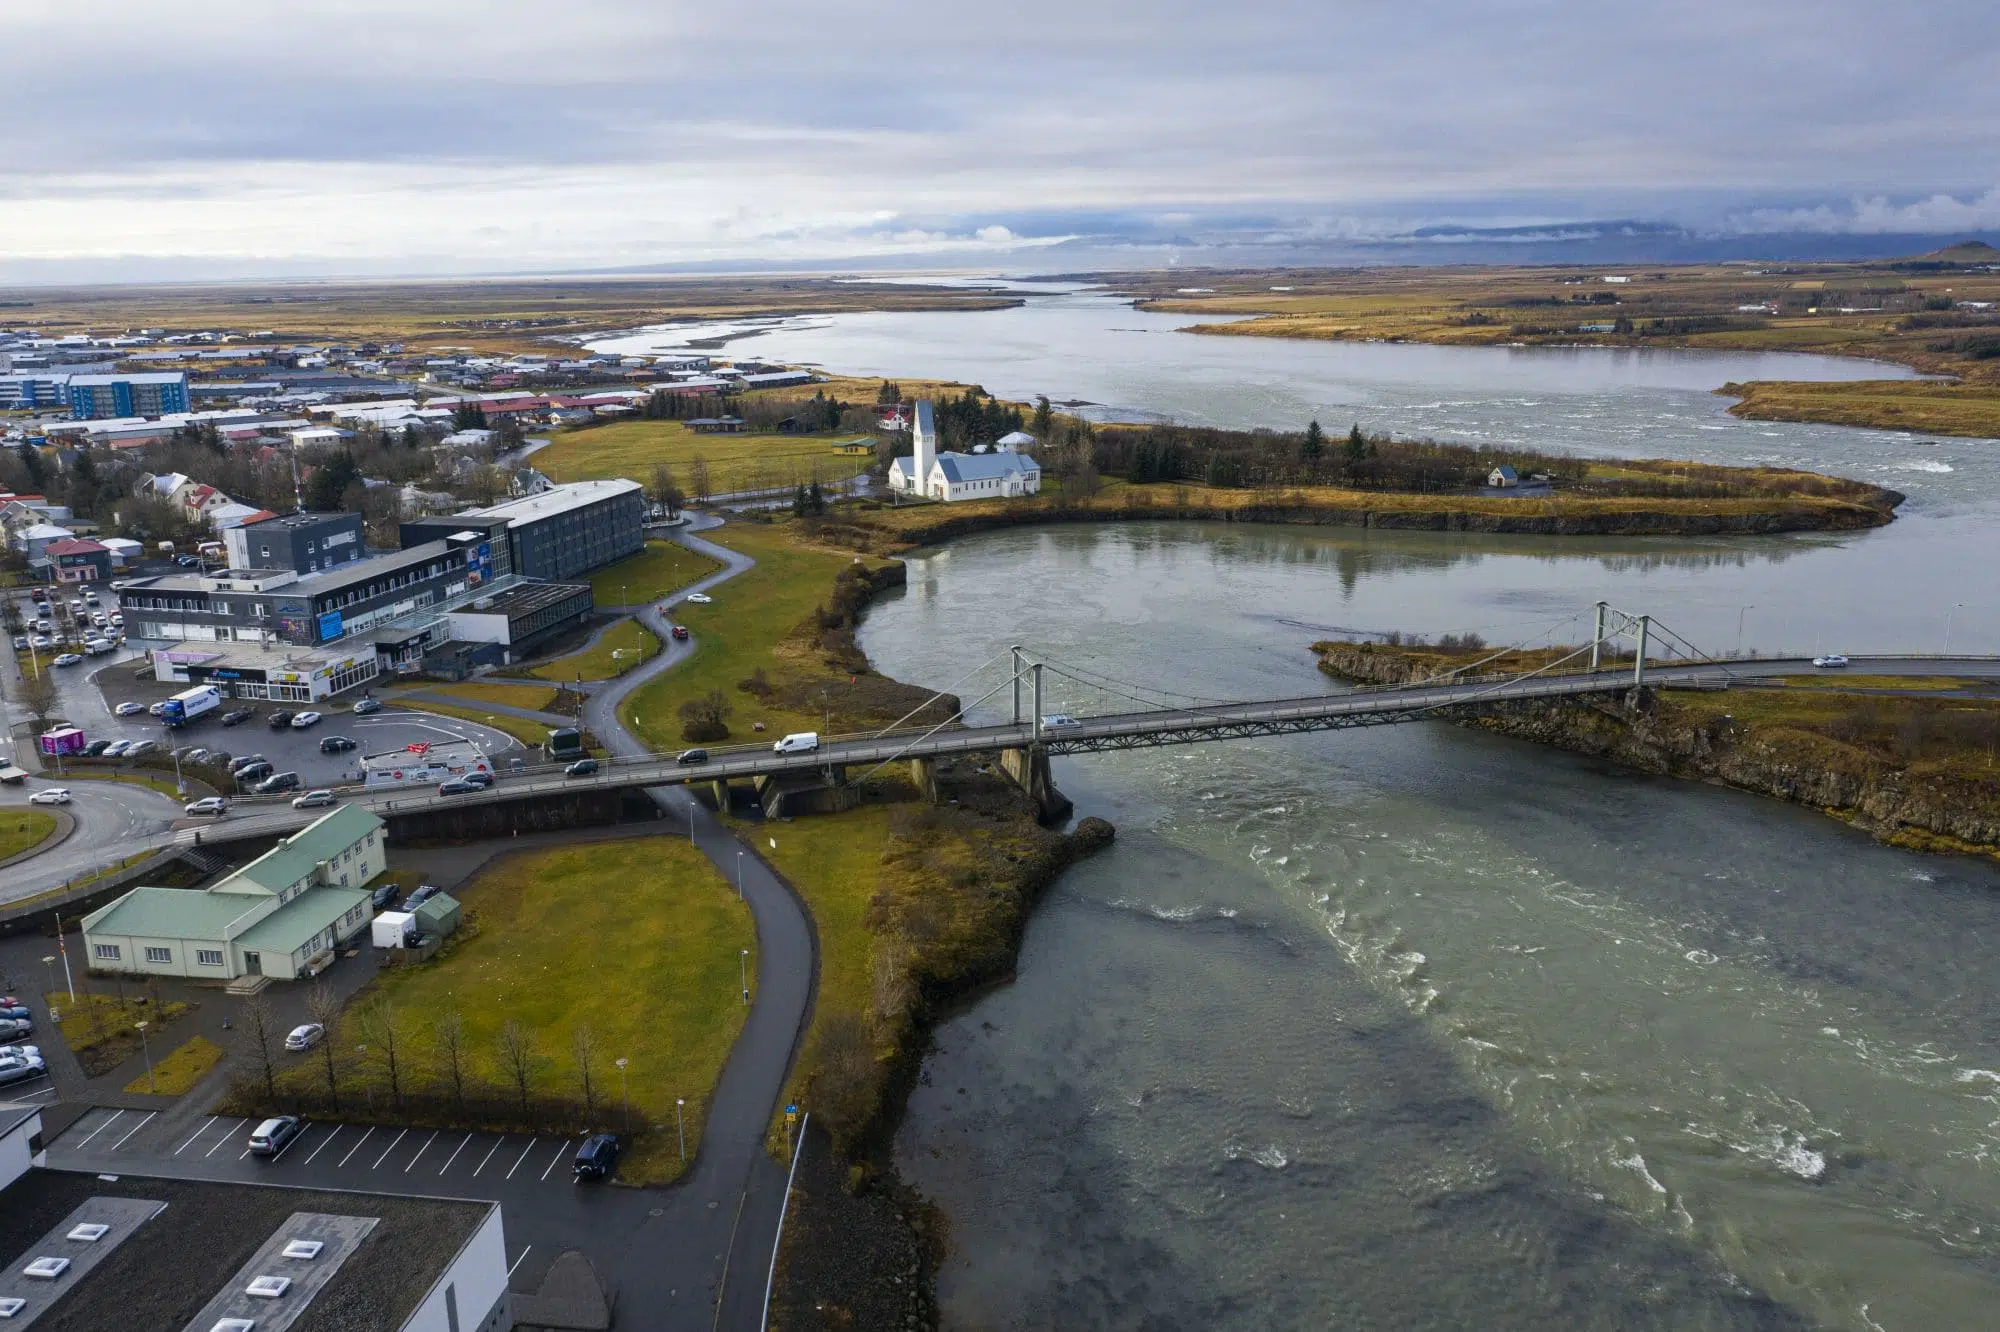 Hot Water Shortage in Selfoss: Public Pool Closed Indefinitely